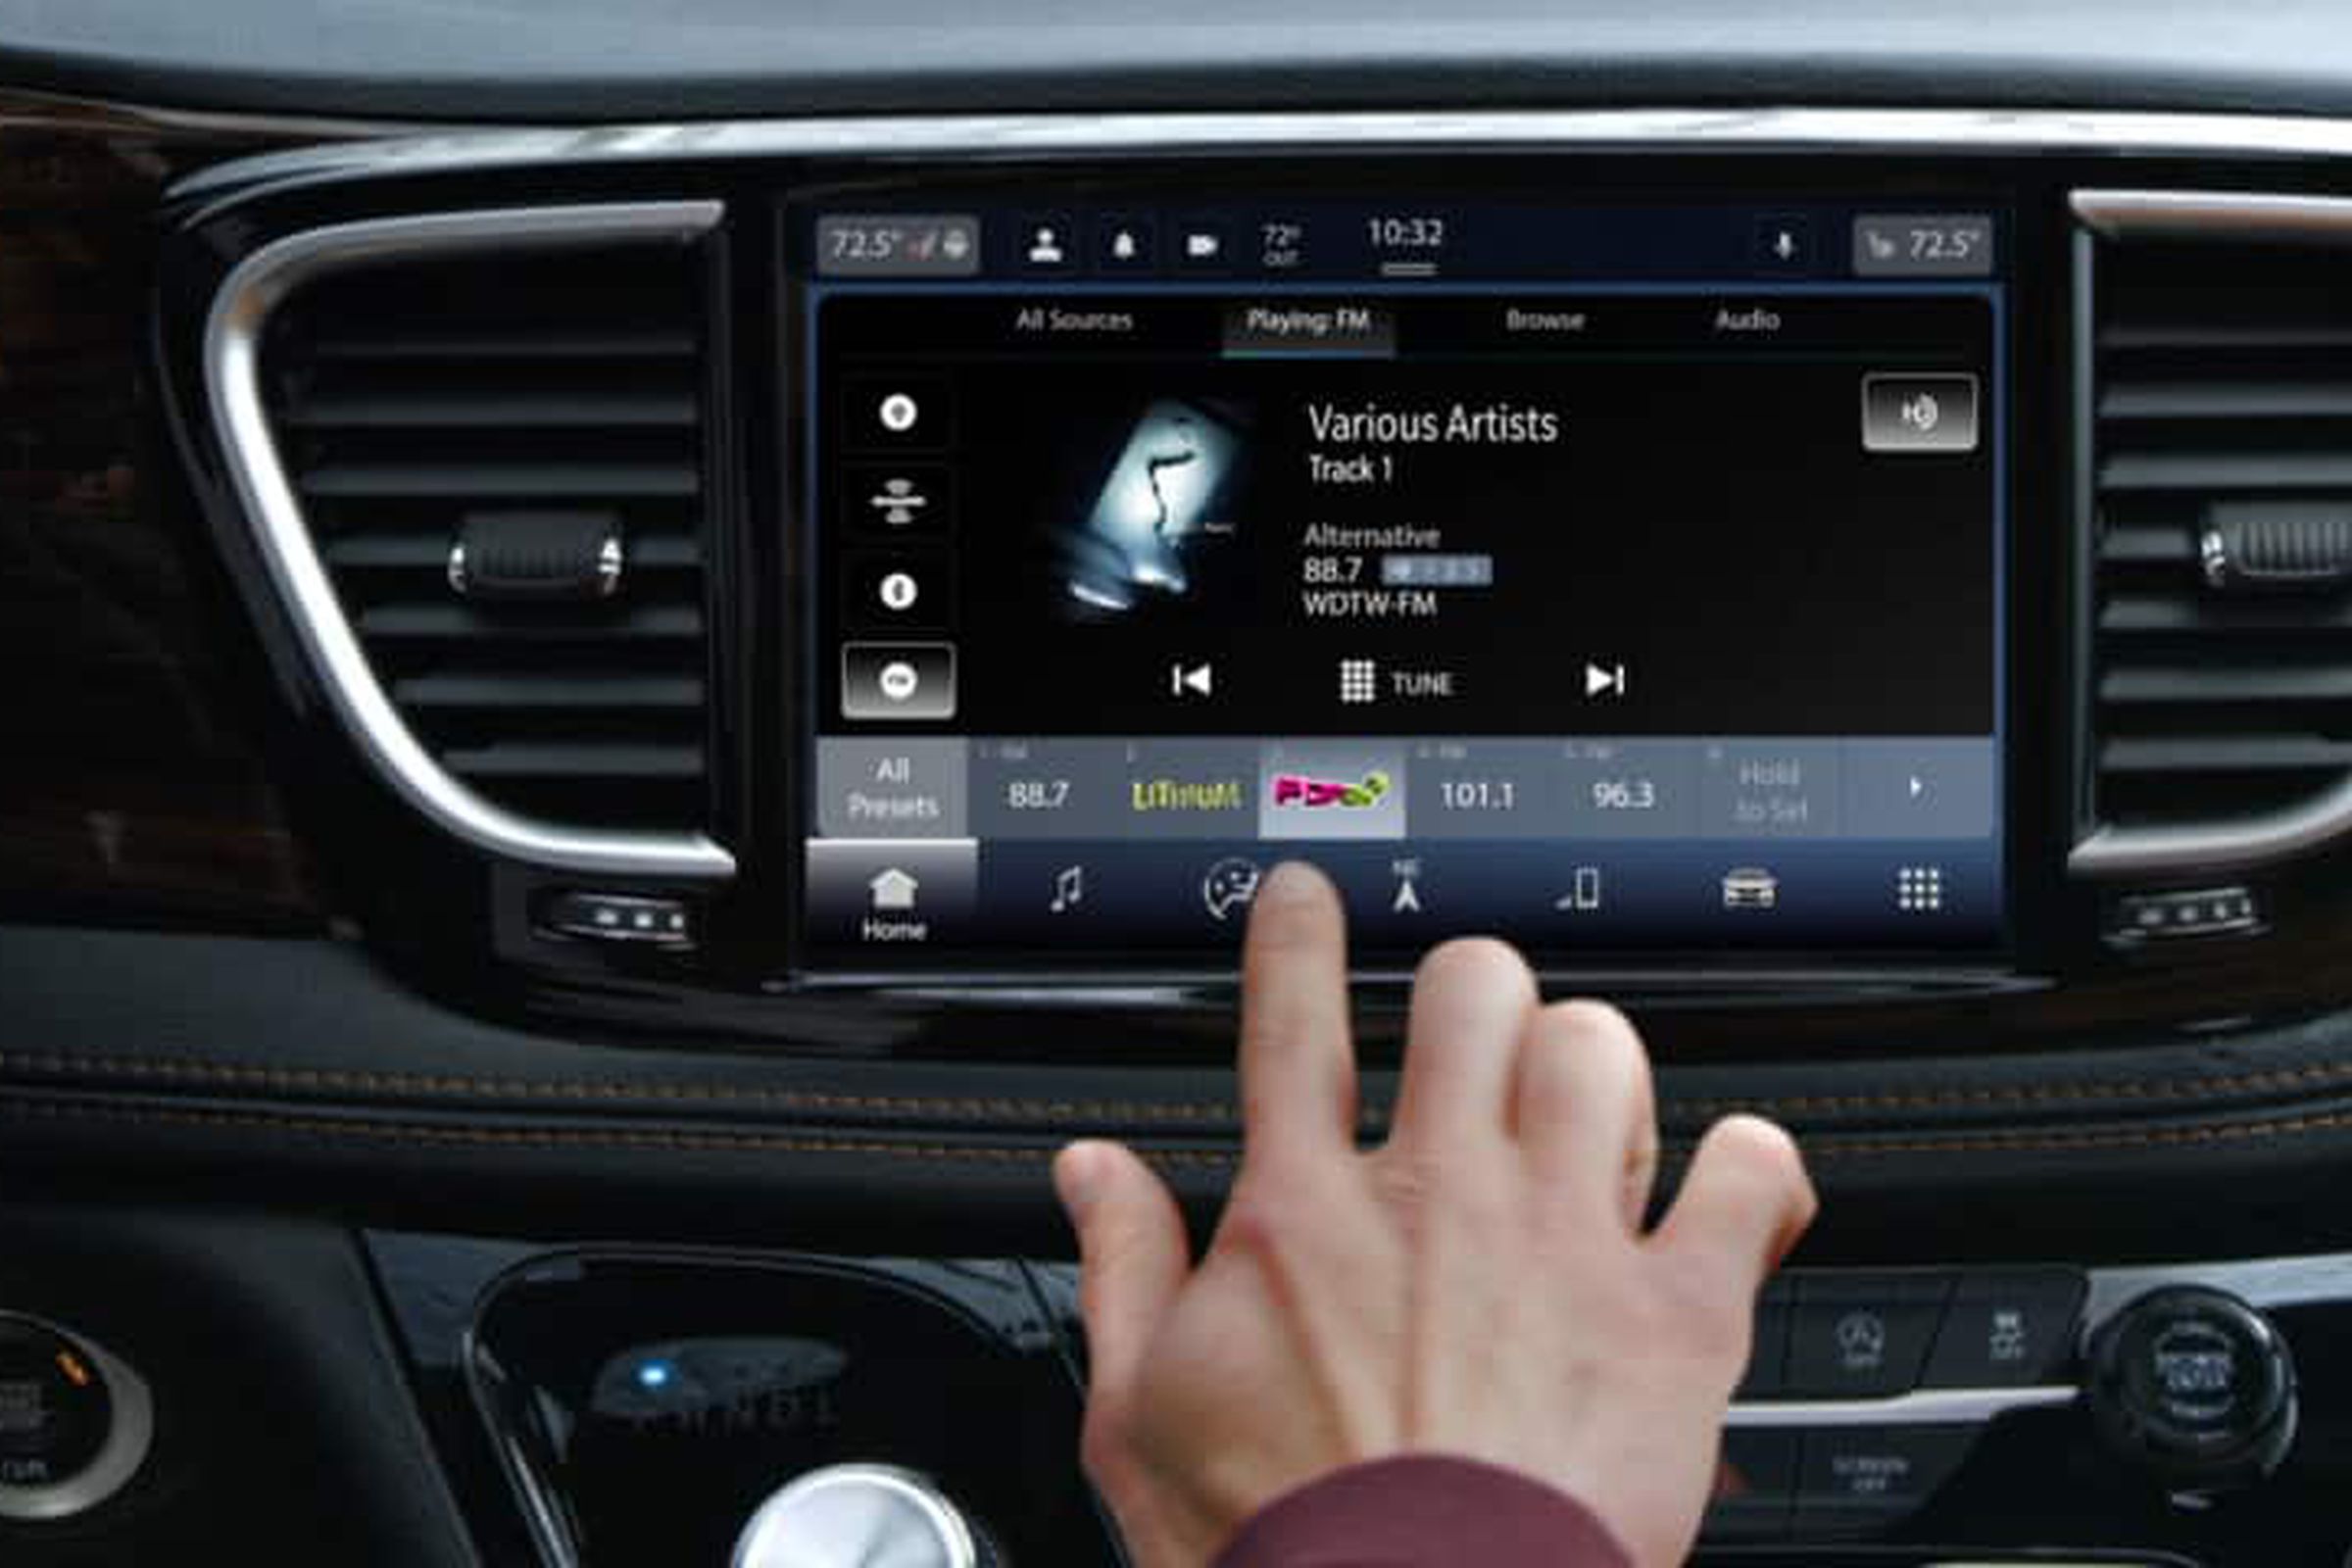 The radio in the 2022 Chrysler Pacifica, which includes Bluetooth.